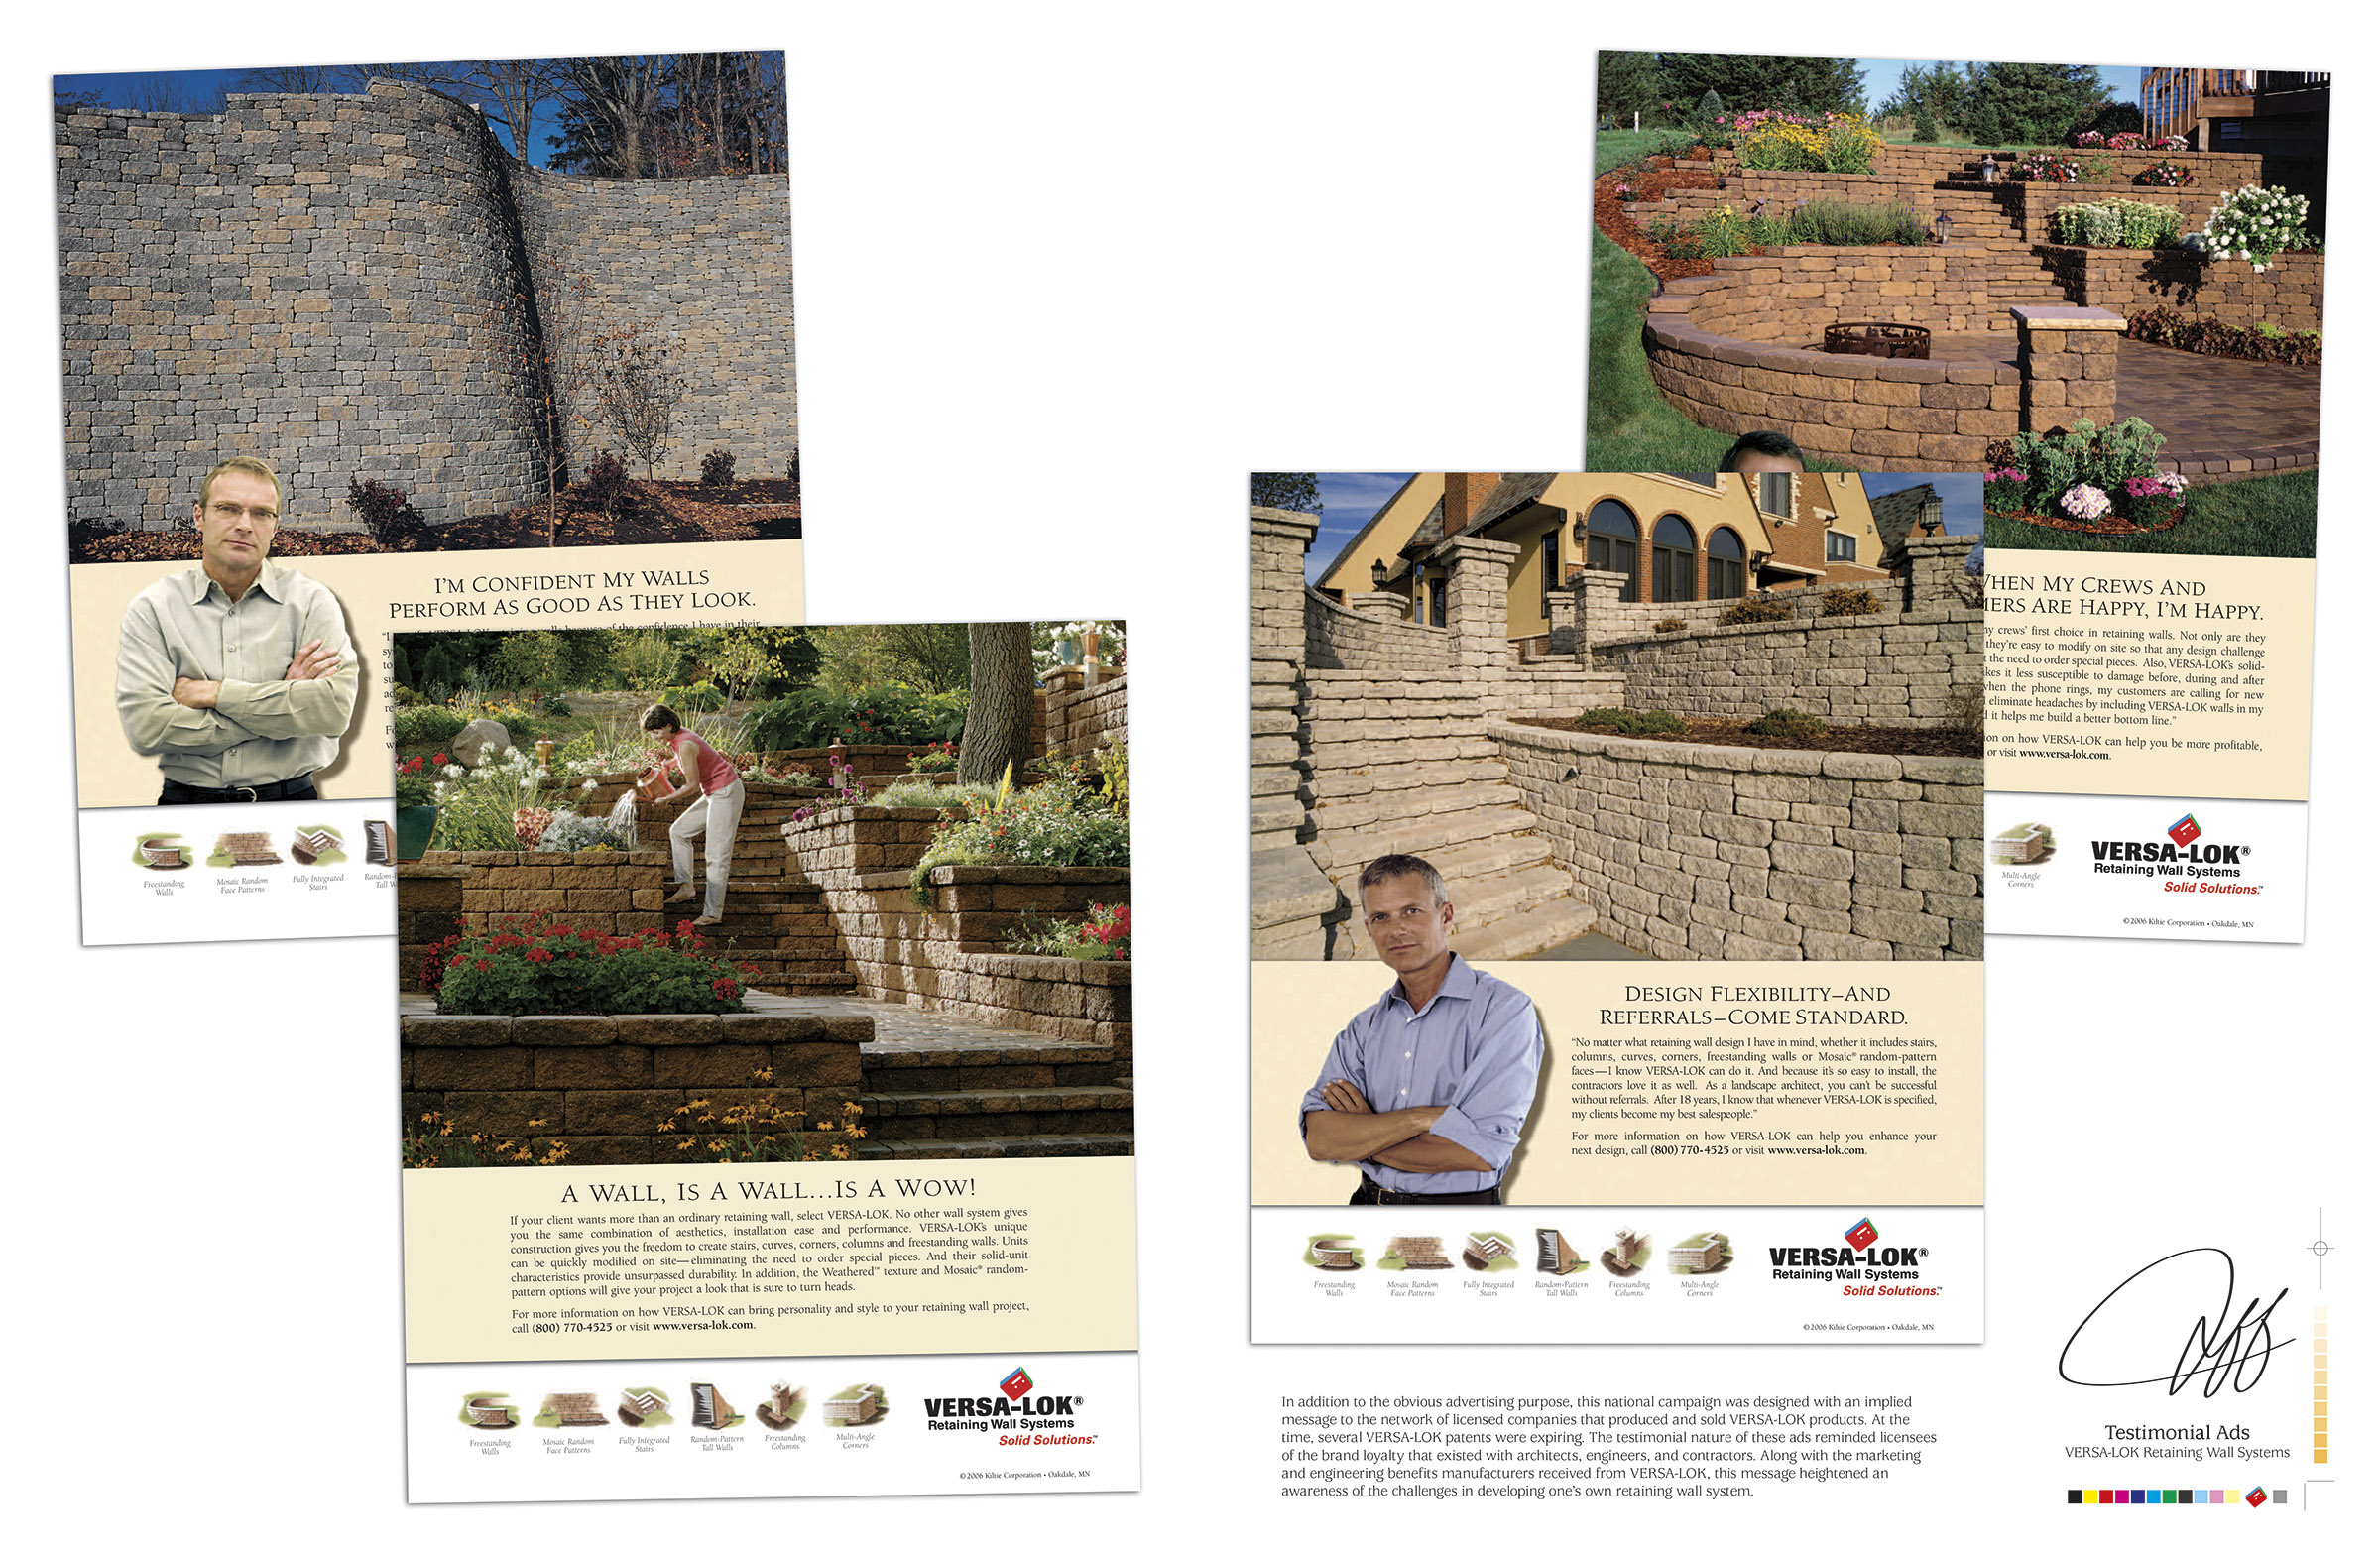 This is the Testimonial Ads spread from Jeff Nelson’s portfolio.